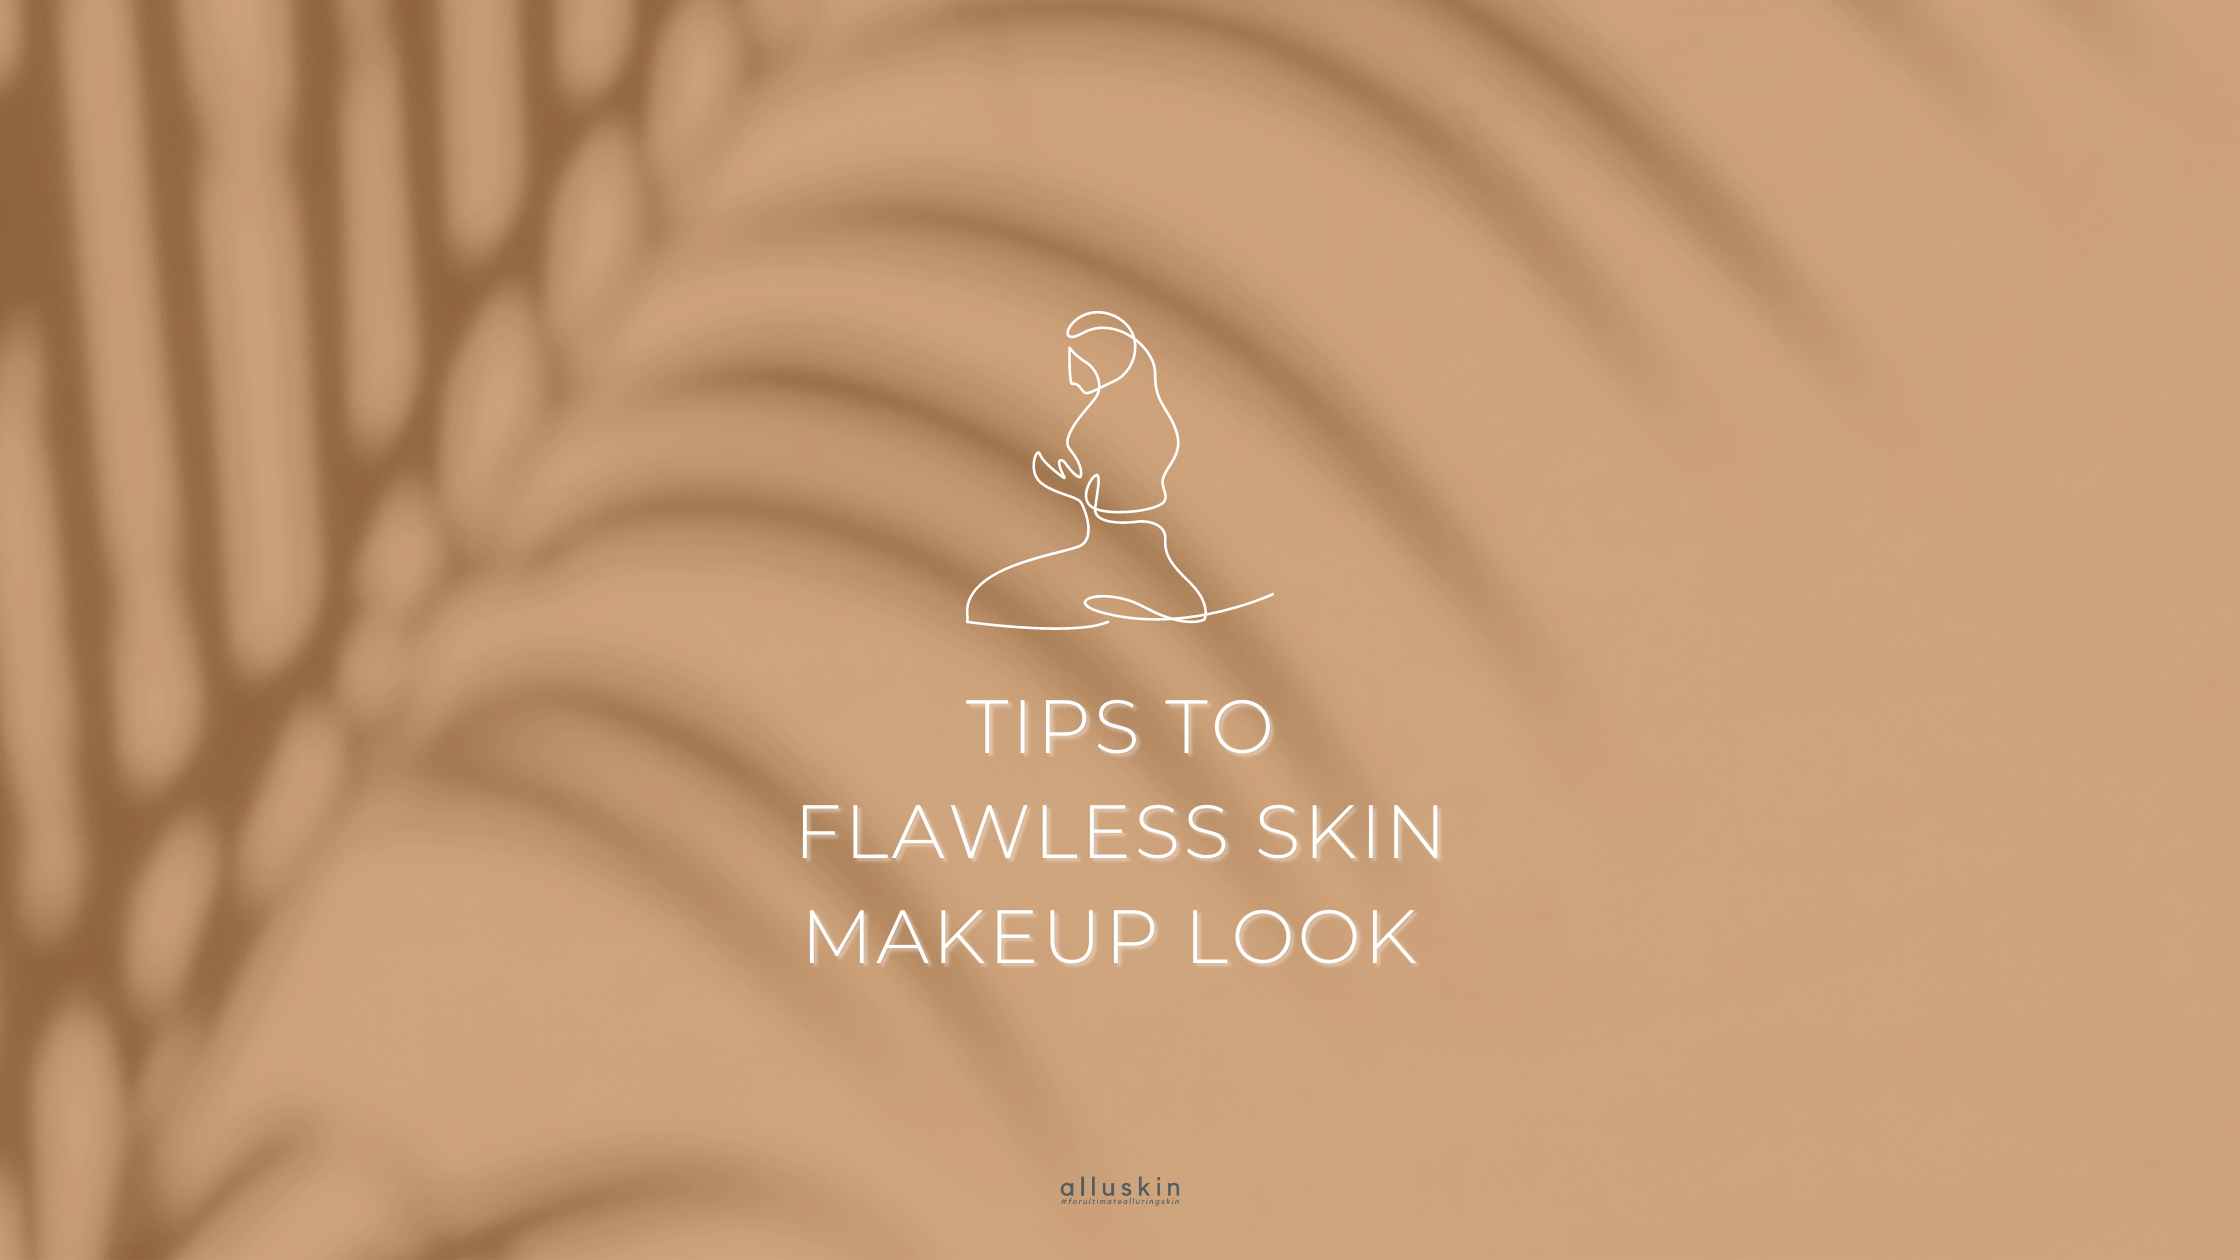 Tips to flawless skin makeup look!